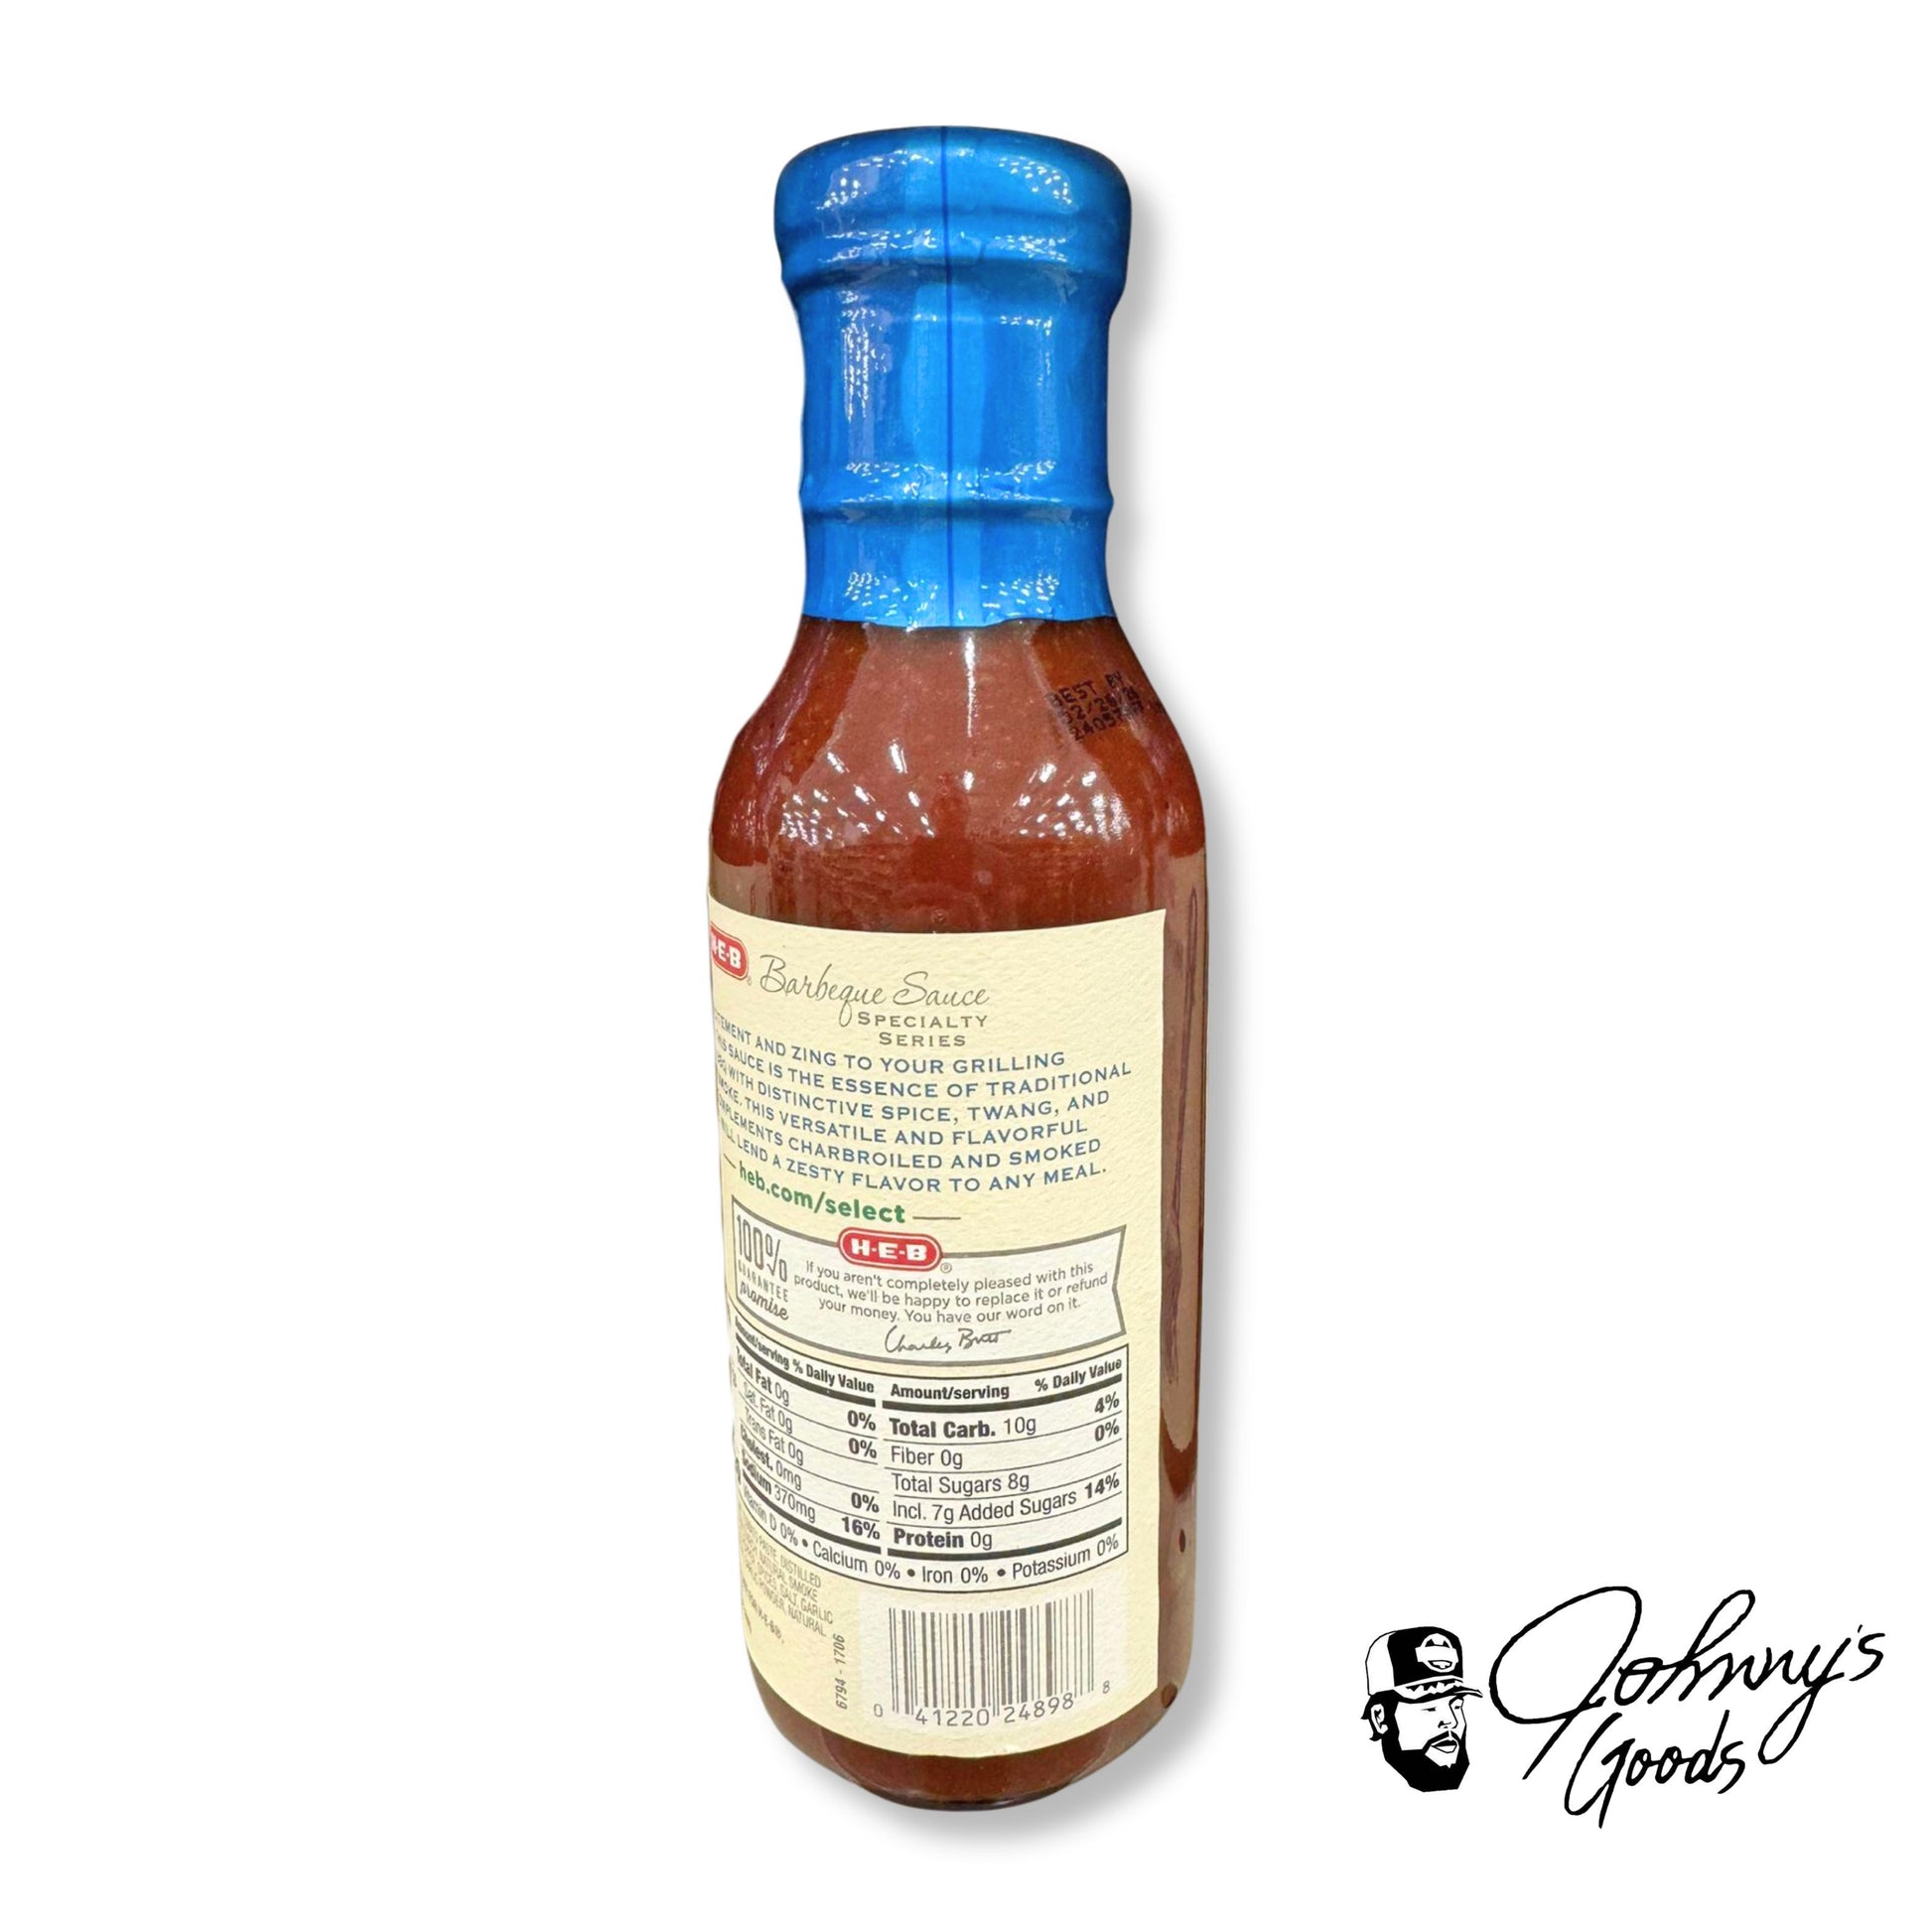 H‑E‑B Barbeque Sauce Specialty Series heb texas barbecue flavors sauces heat memphis tx